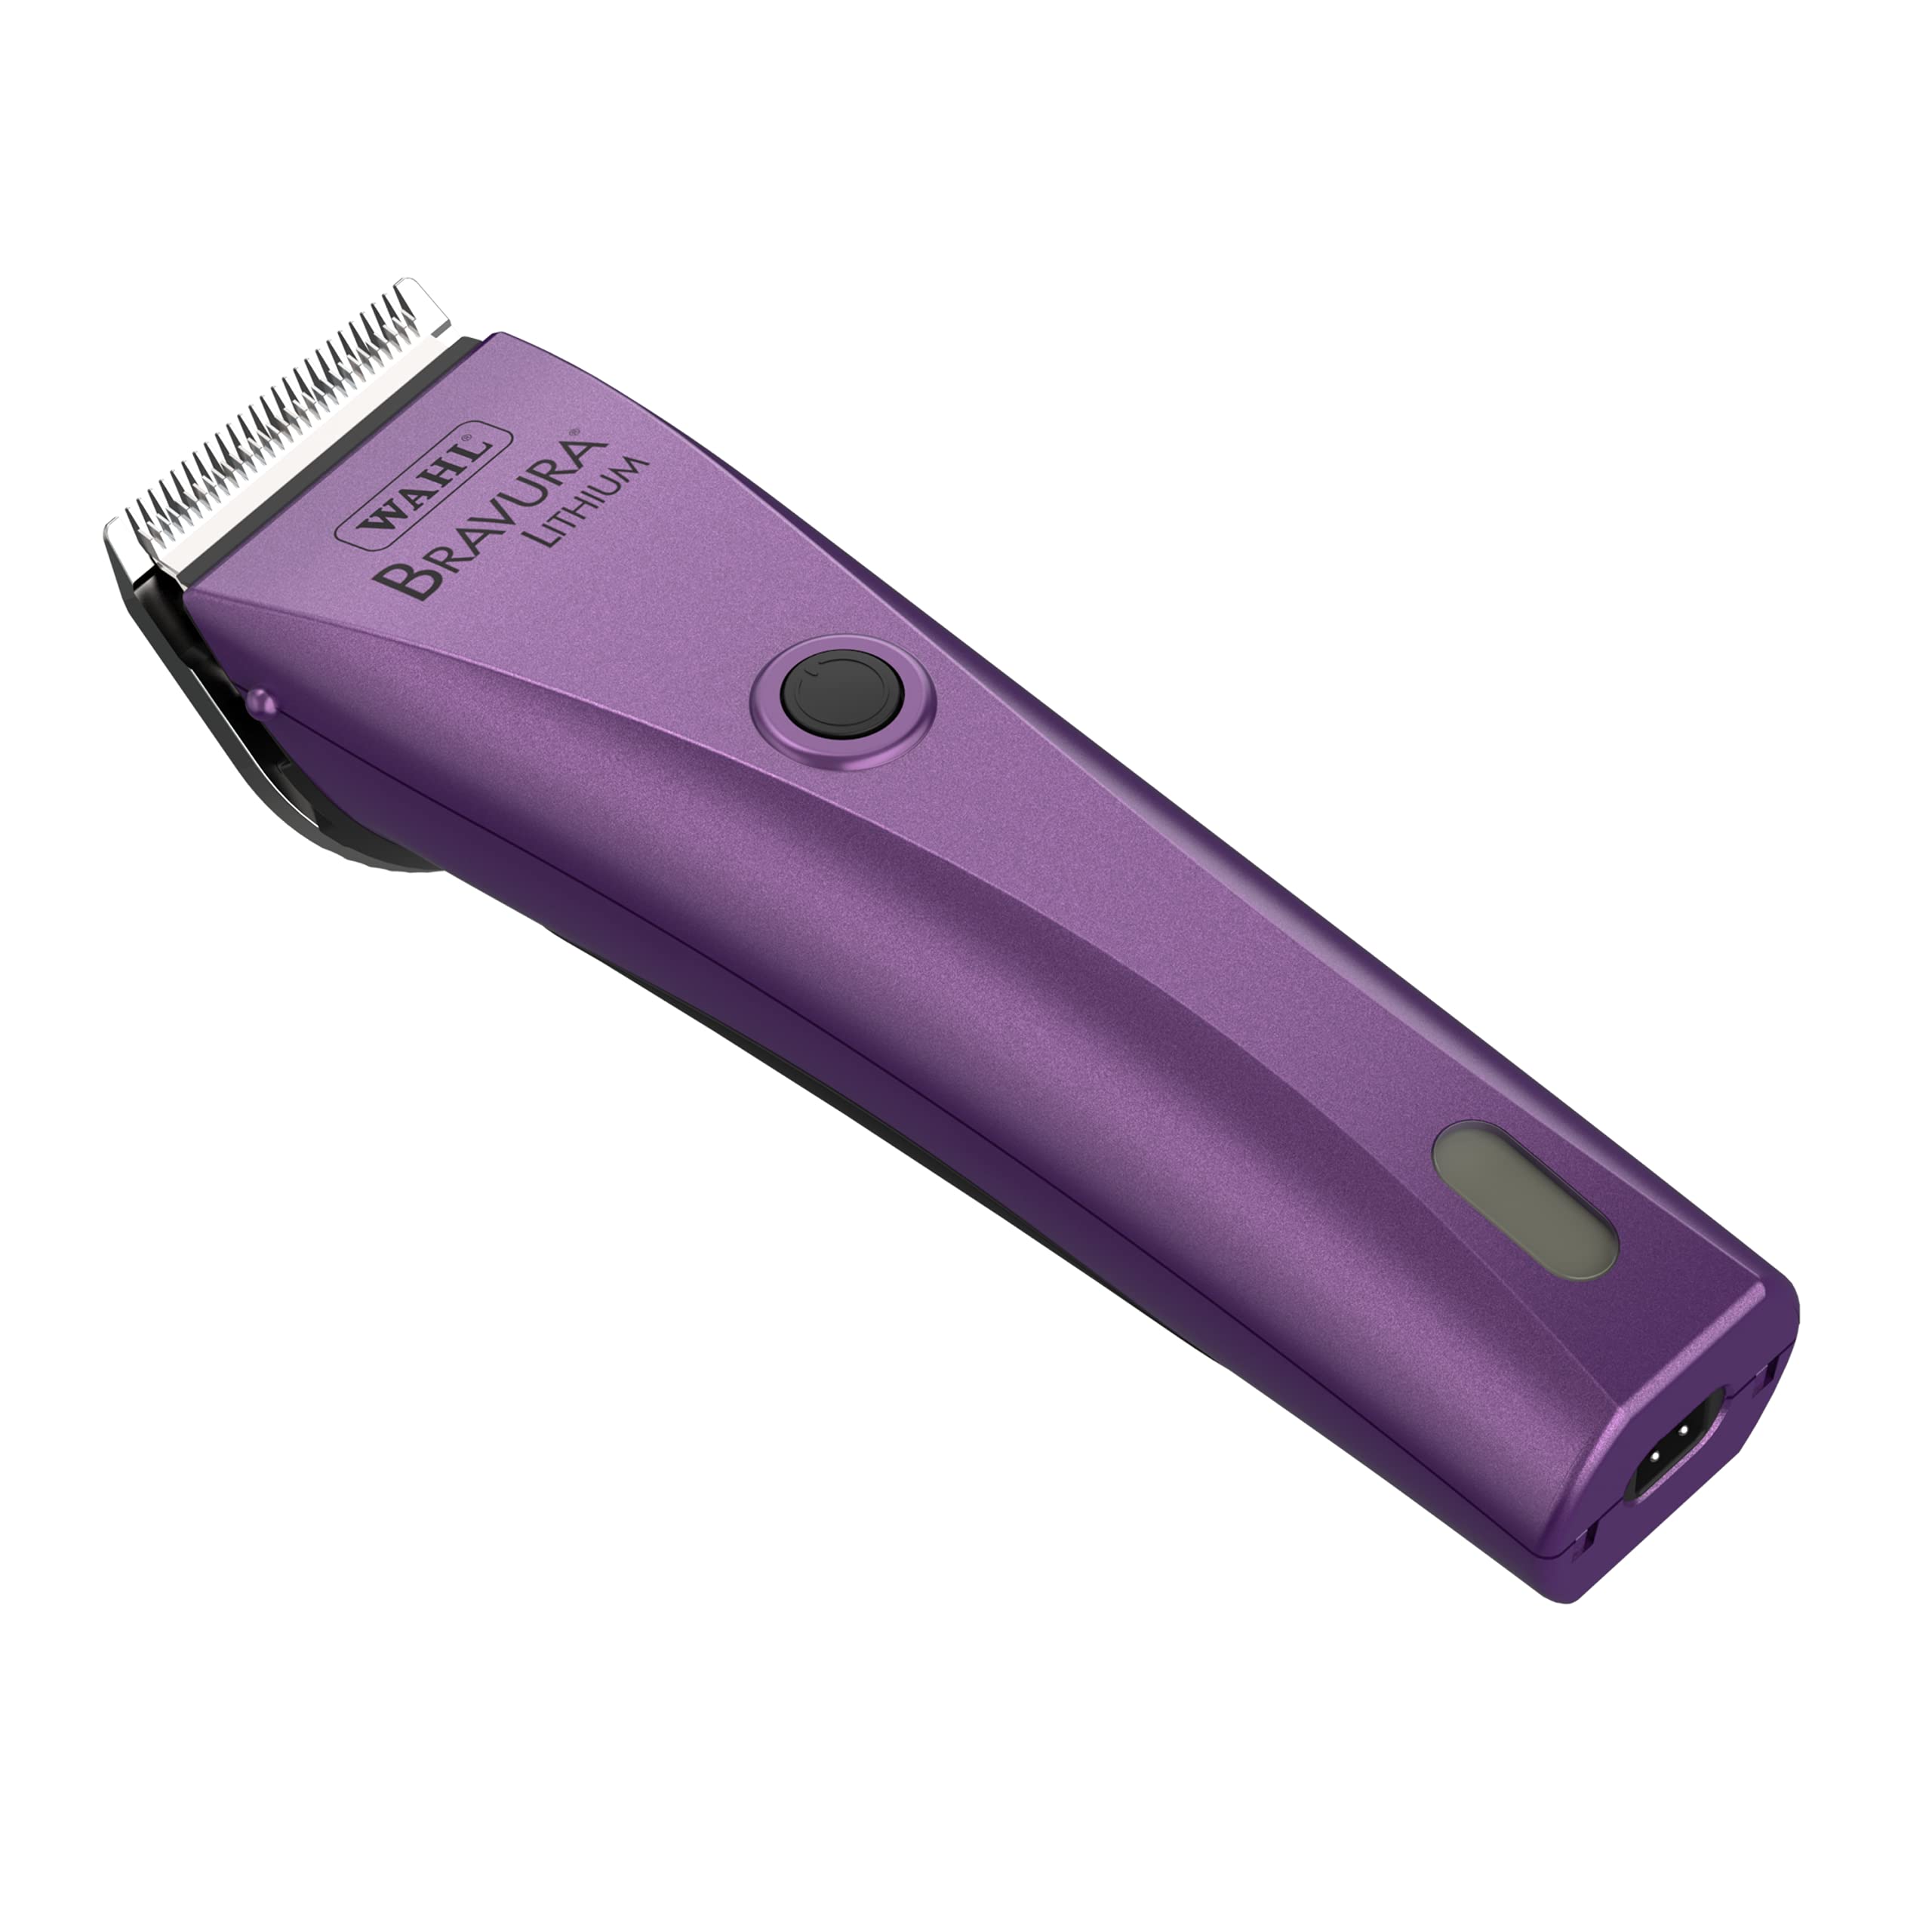 WAHL Professional Animal Bravura Lithium Ion Clipper - Pet, Dog, Cat, and Horse Corded/Cordless Clipper Kit, Purple (41870-0423)